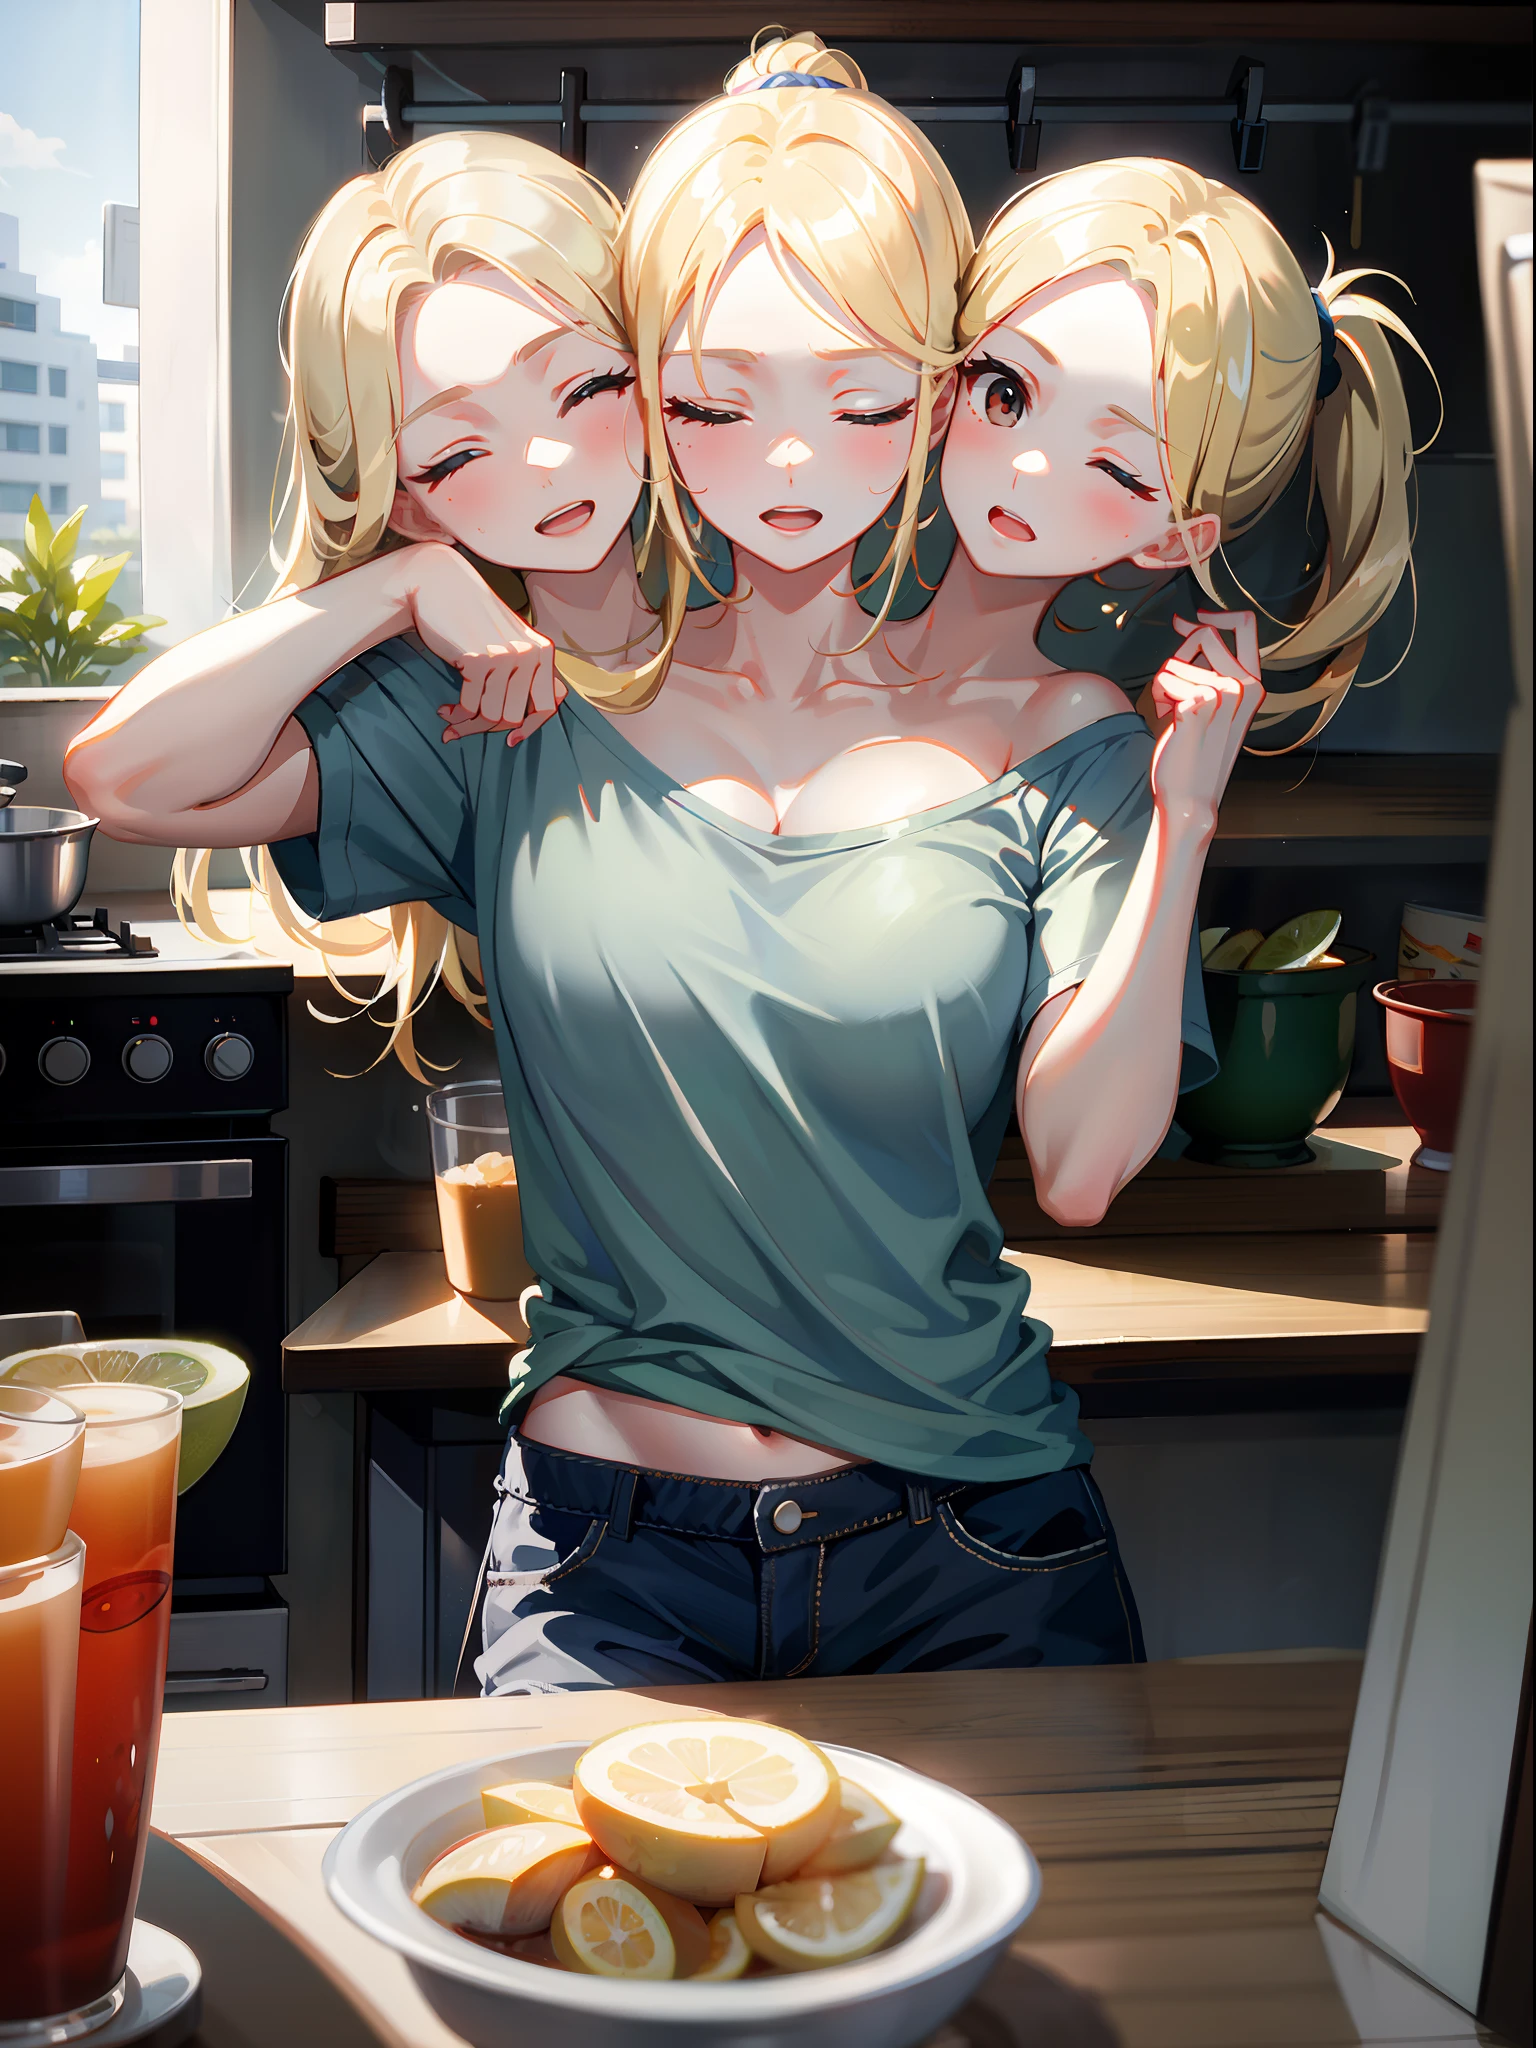 (masterpiece, best quality), best resolution, (3heads:1.5), 1girl, weary, headache, hangover, in pain, dizzy, blond hair, brown eyes, one eye closed, open mouth, light blue t-shirt, tan pants, hand on forehead, apartment kitchen